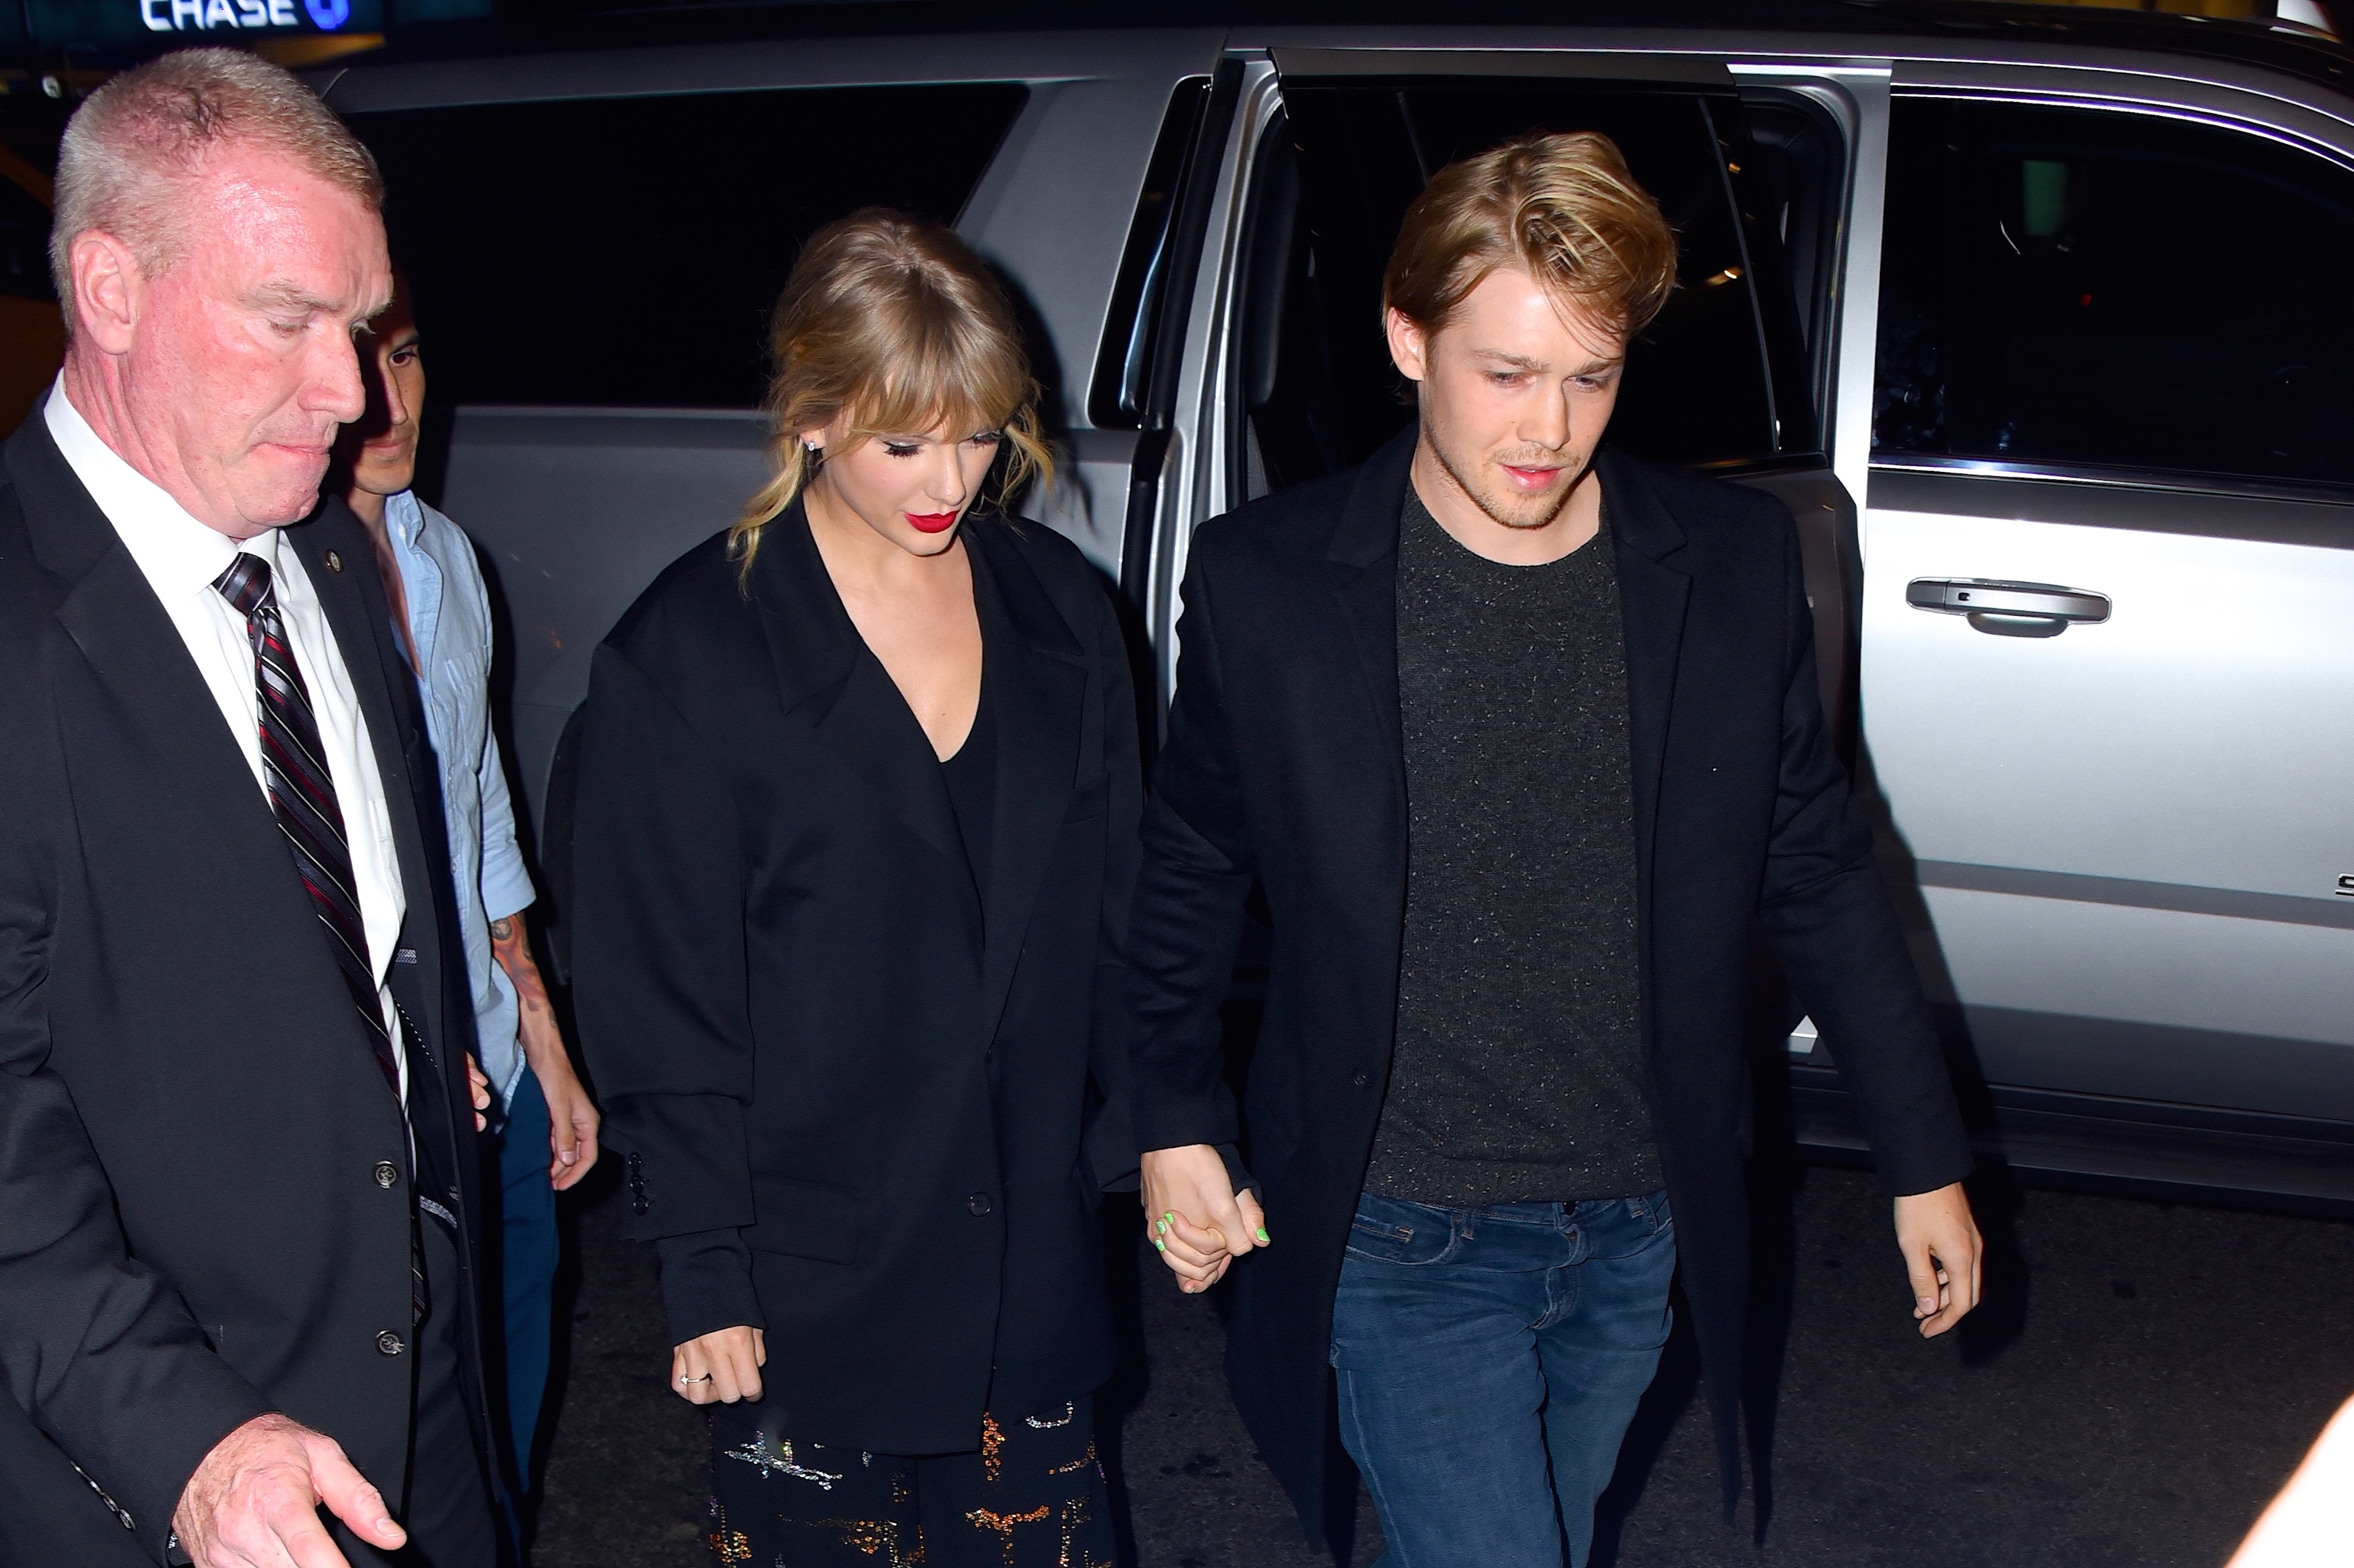 Taylor Swift and Joe Alwyn holding hands, exiting vehicle, in elegant attire